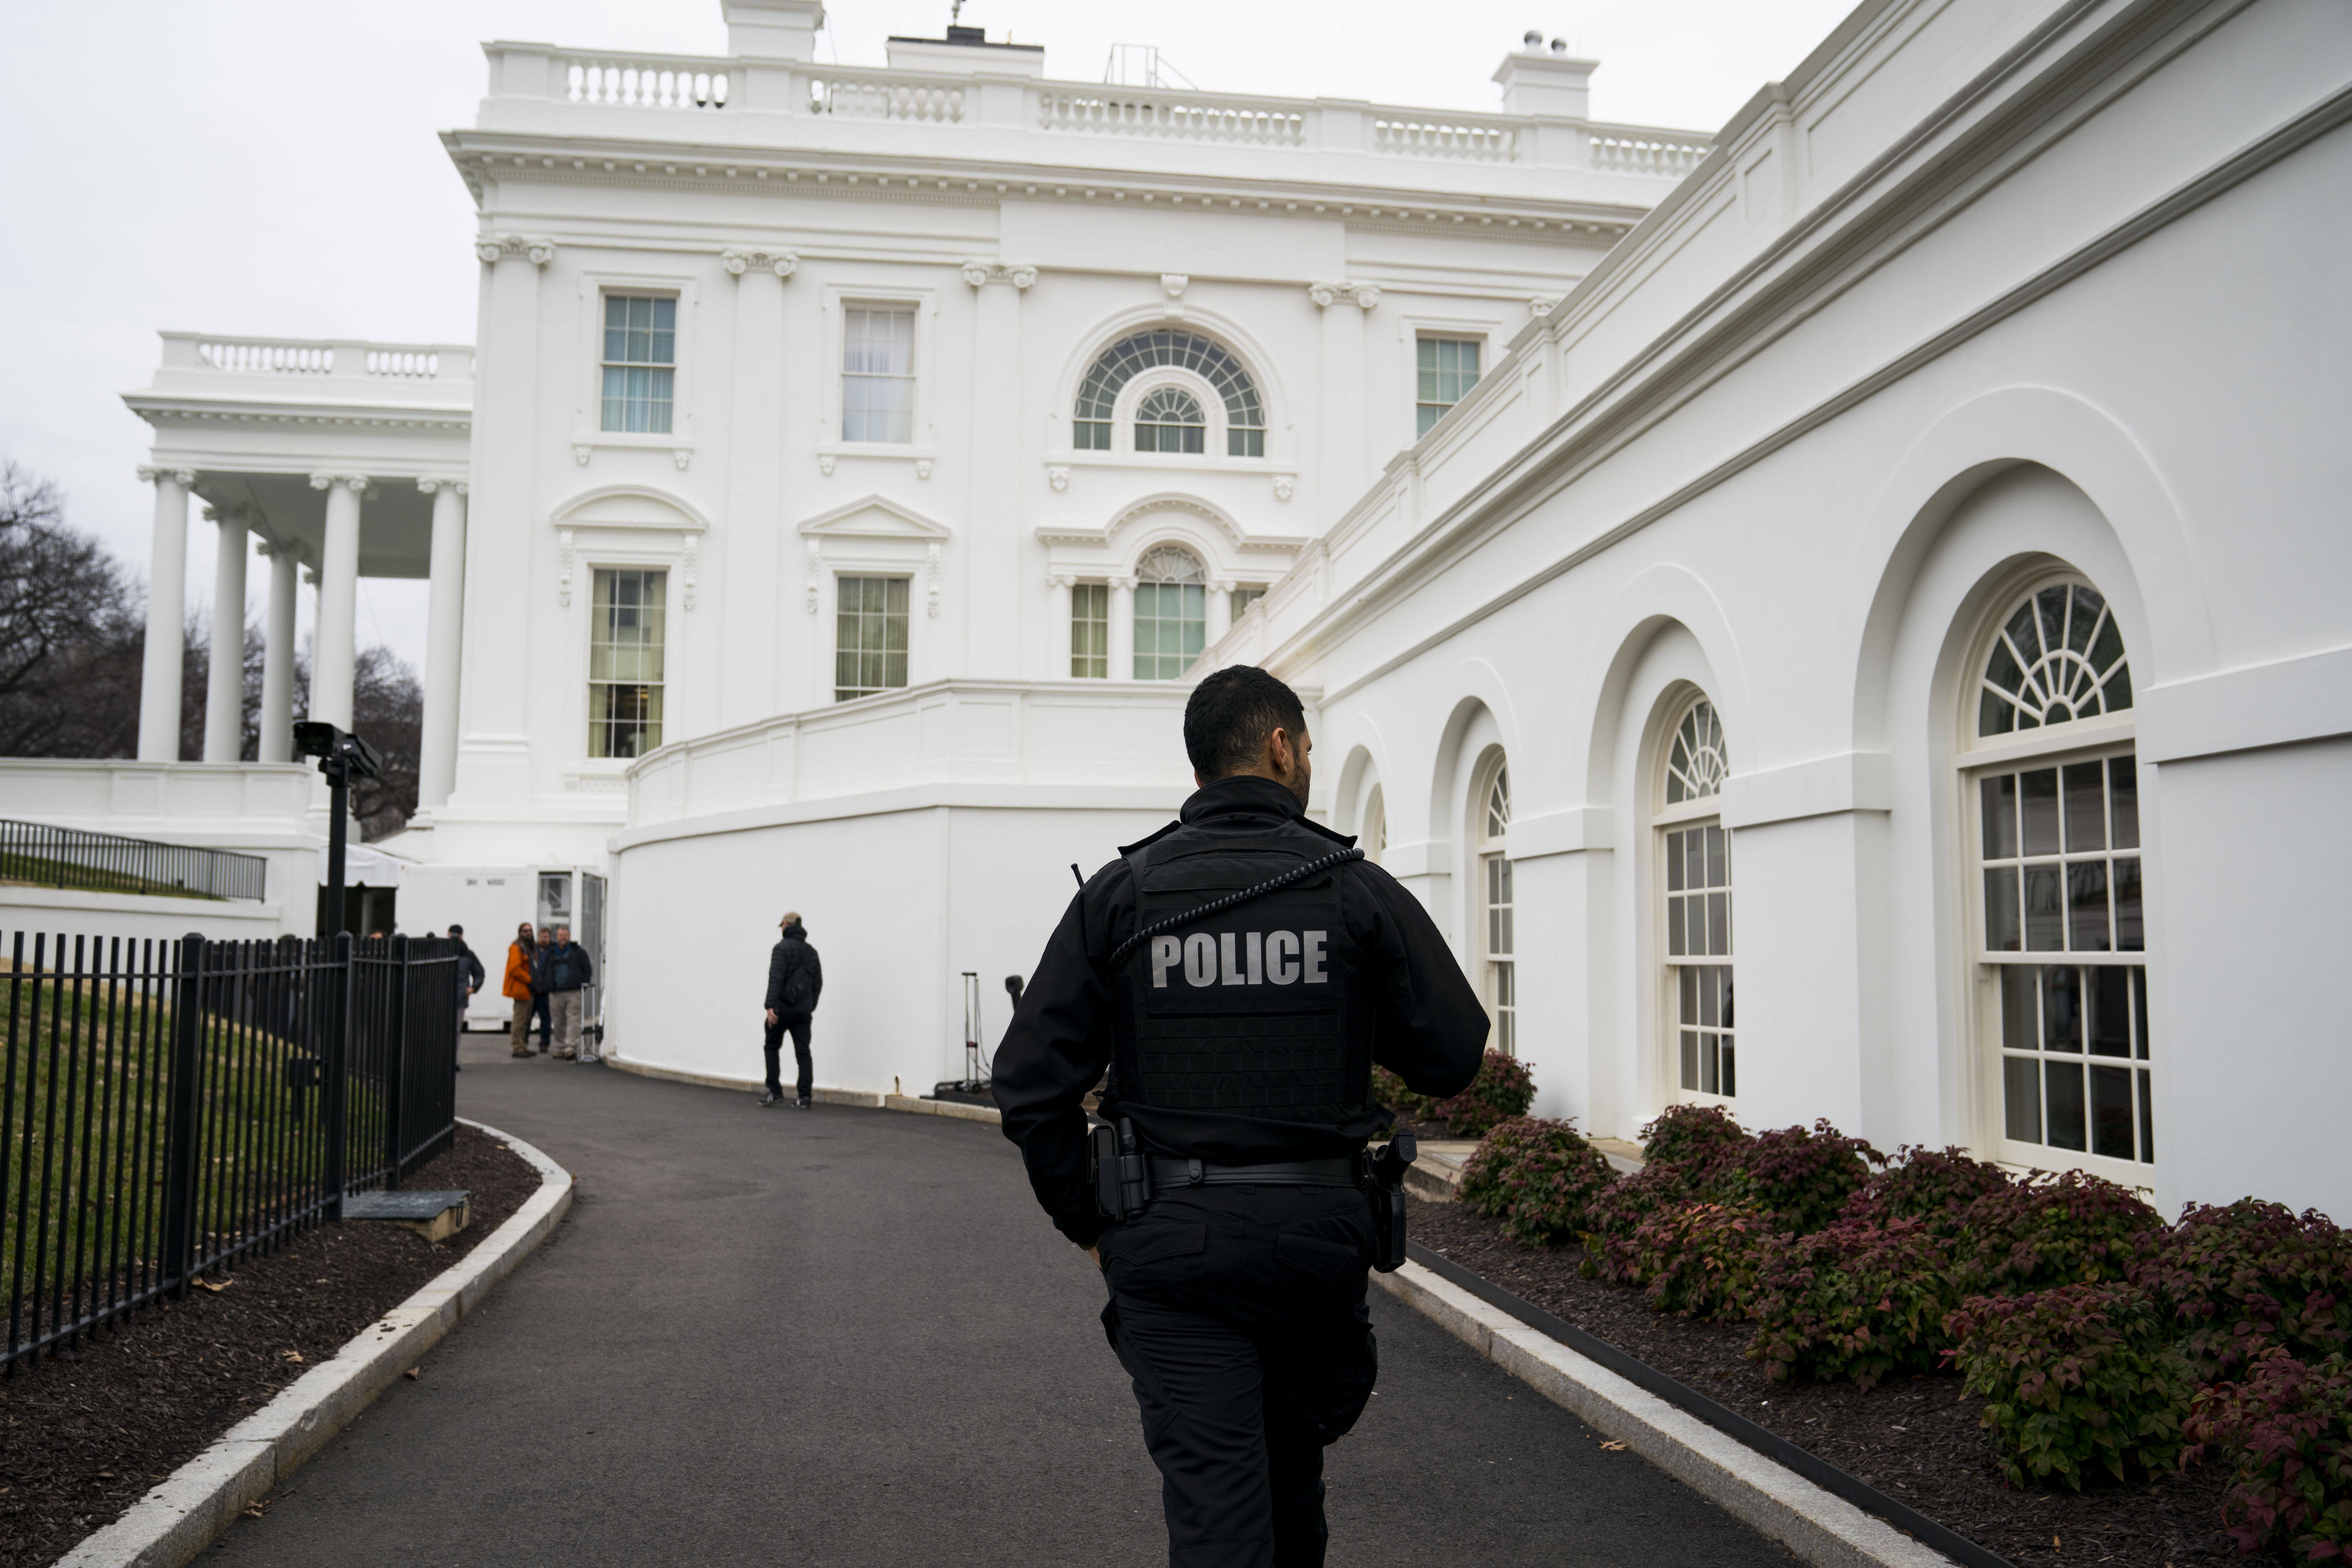 A member of the Secret Service walks around the grounds of the White House on Friday.